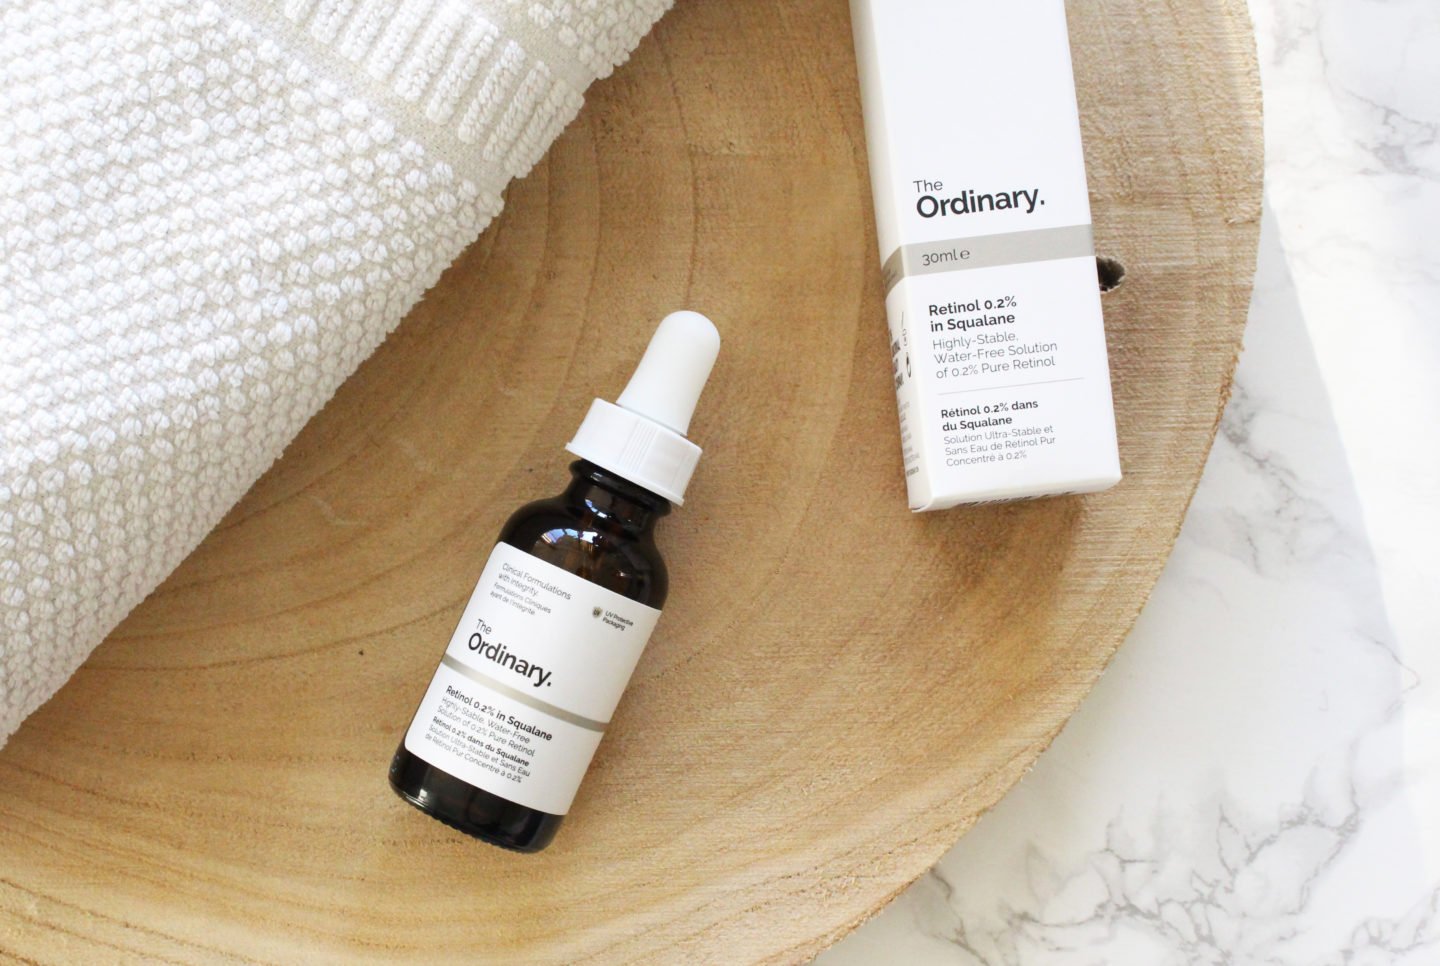 The Ordinary Retional 0.2% In Squalane 30Ml